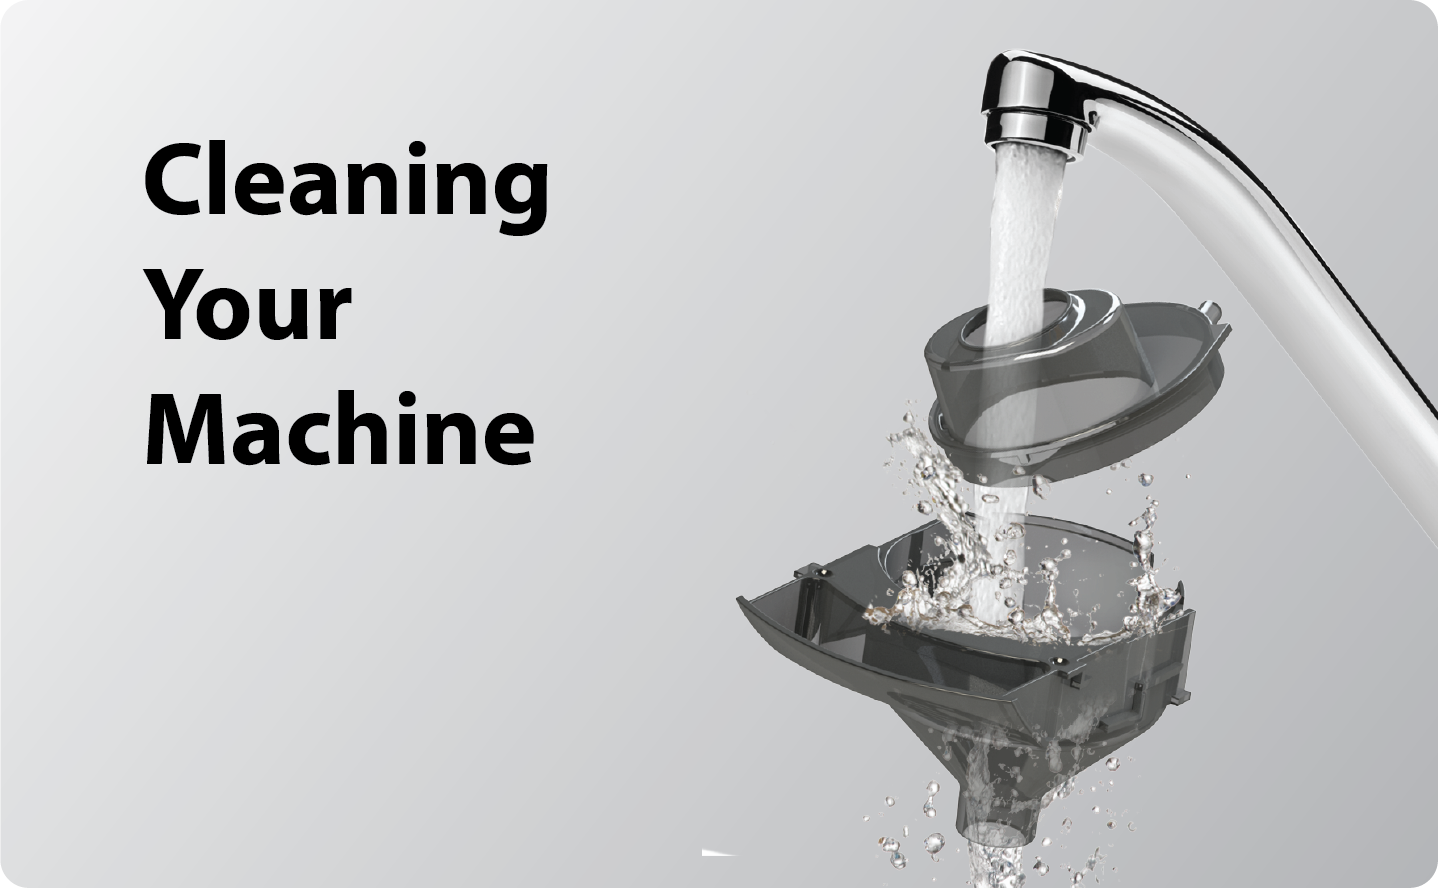 Cleaning Your Machine